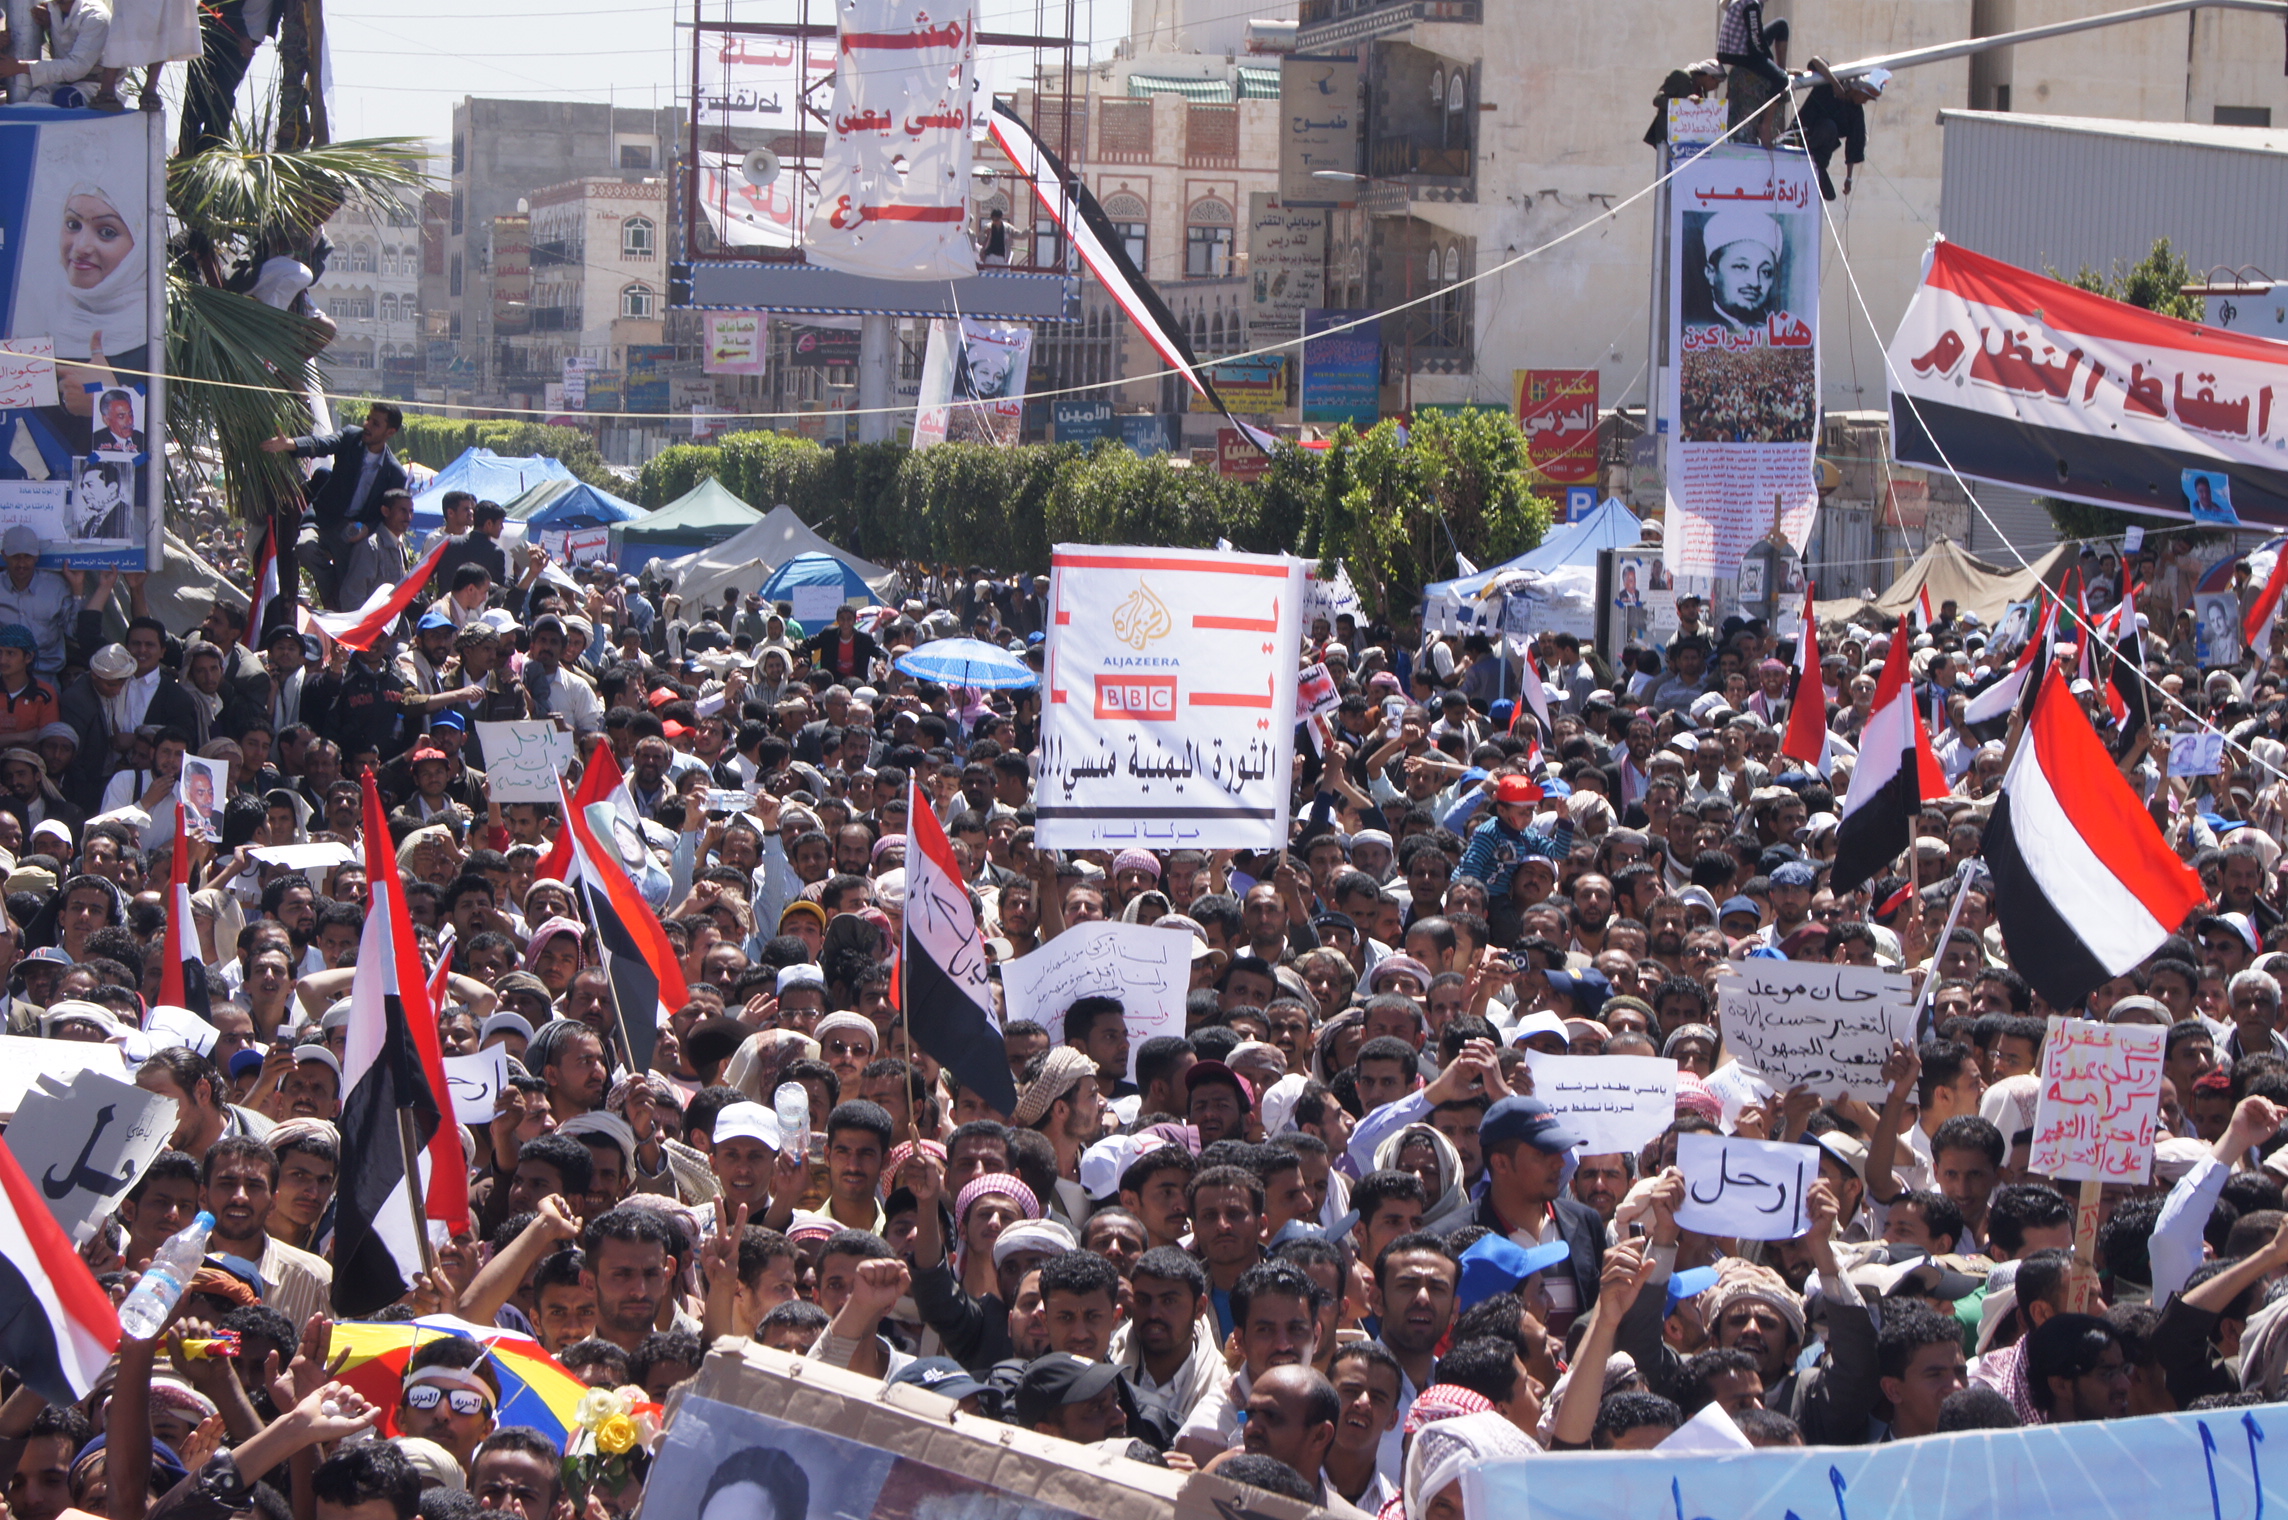 Tens of thousands rally in Yemen's Aden to support separatist takeover